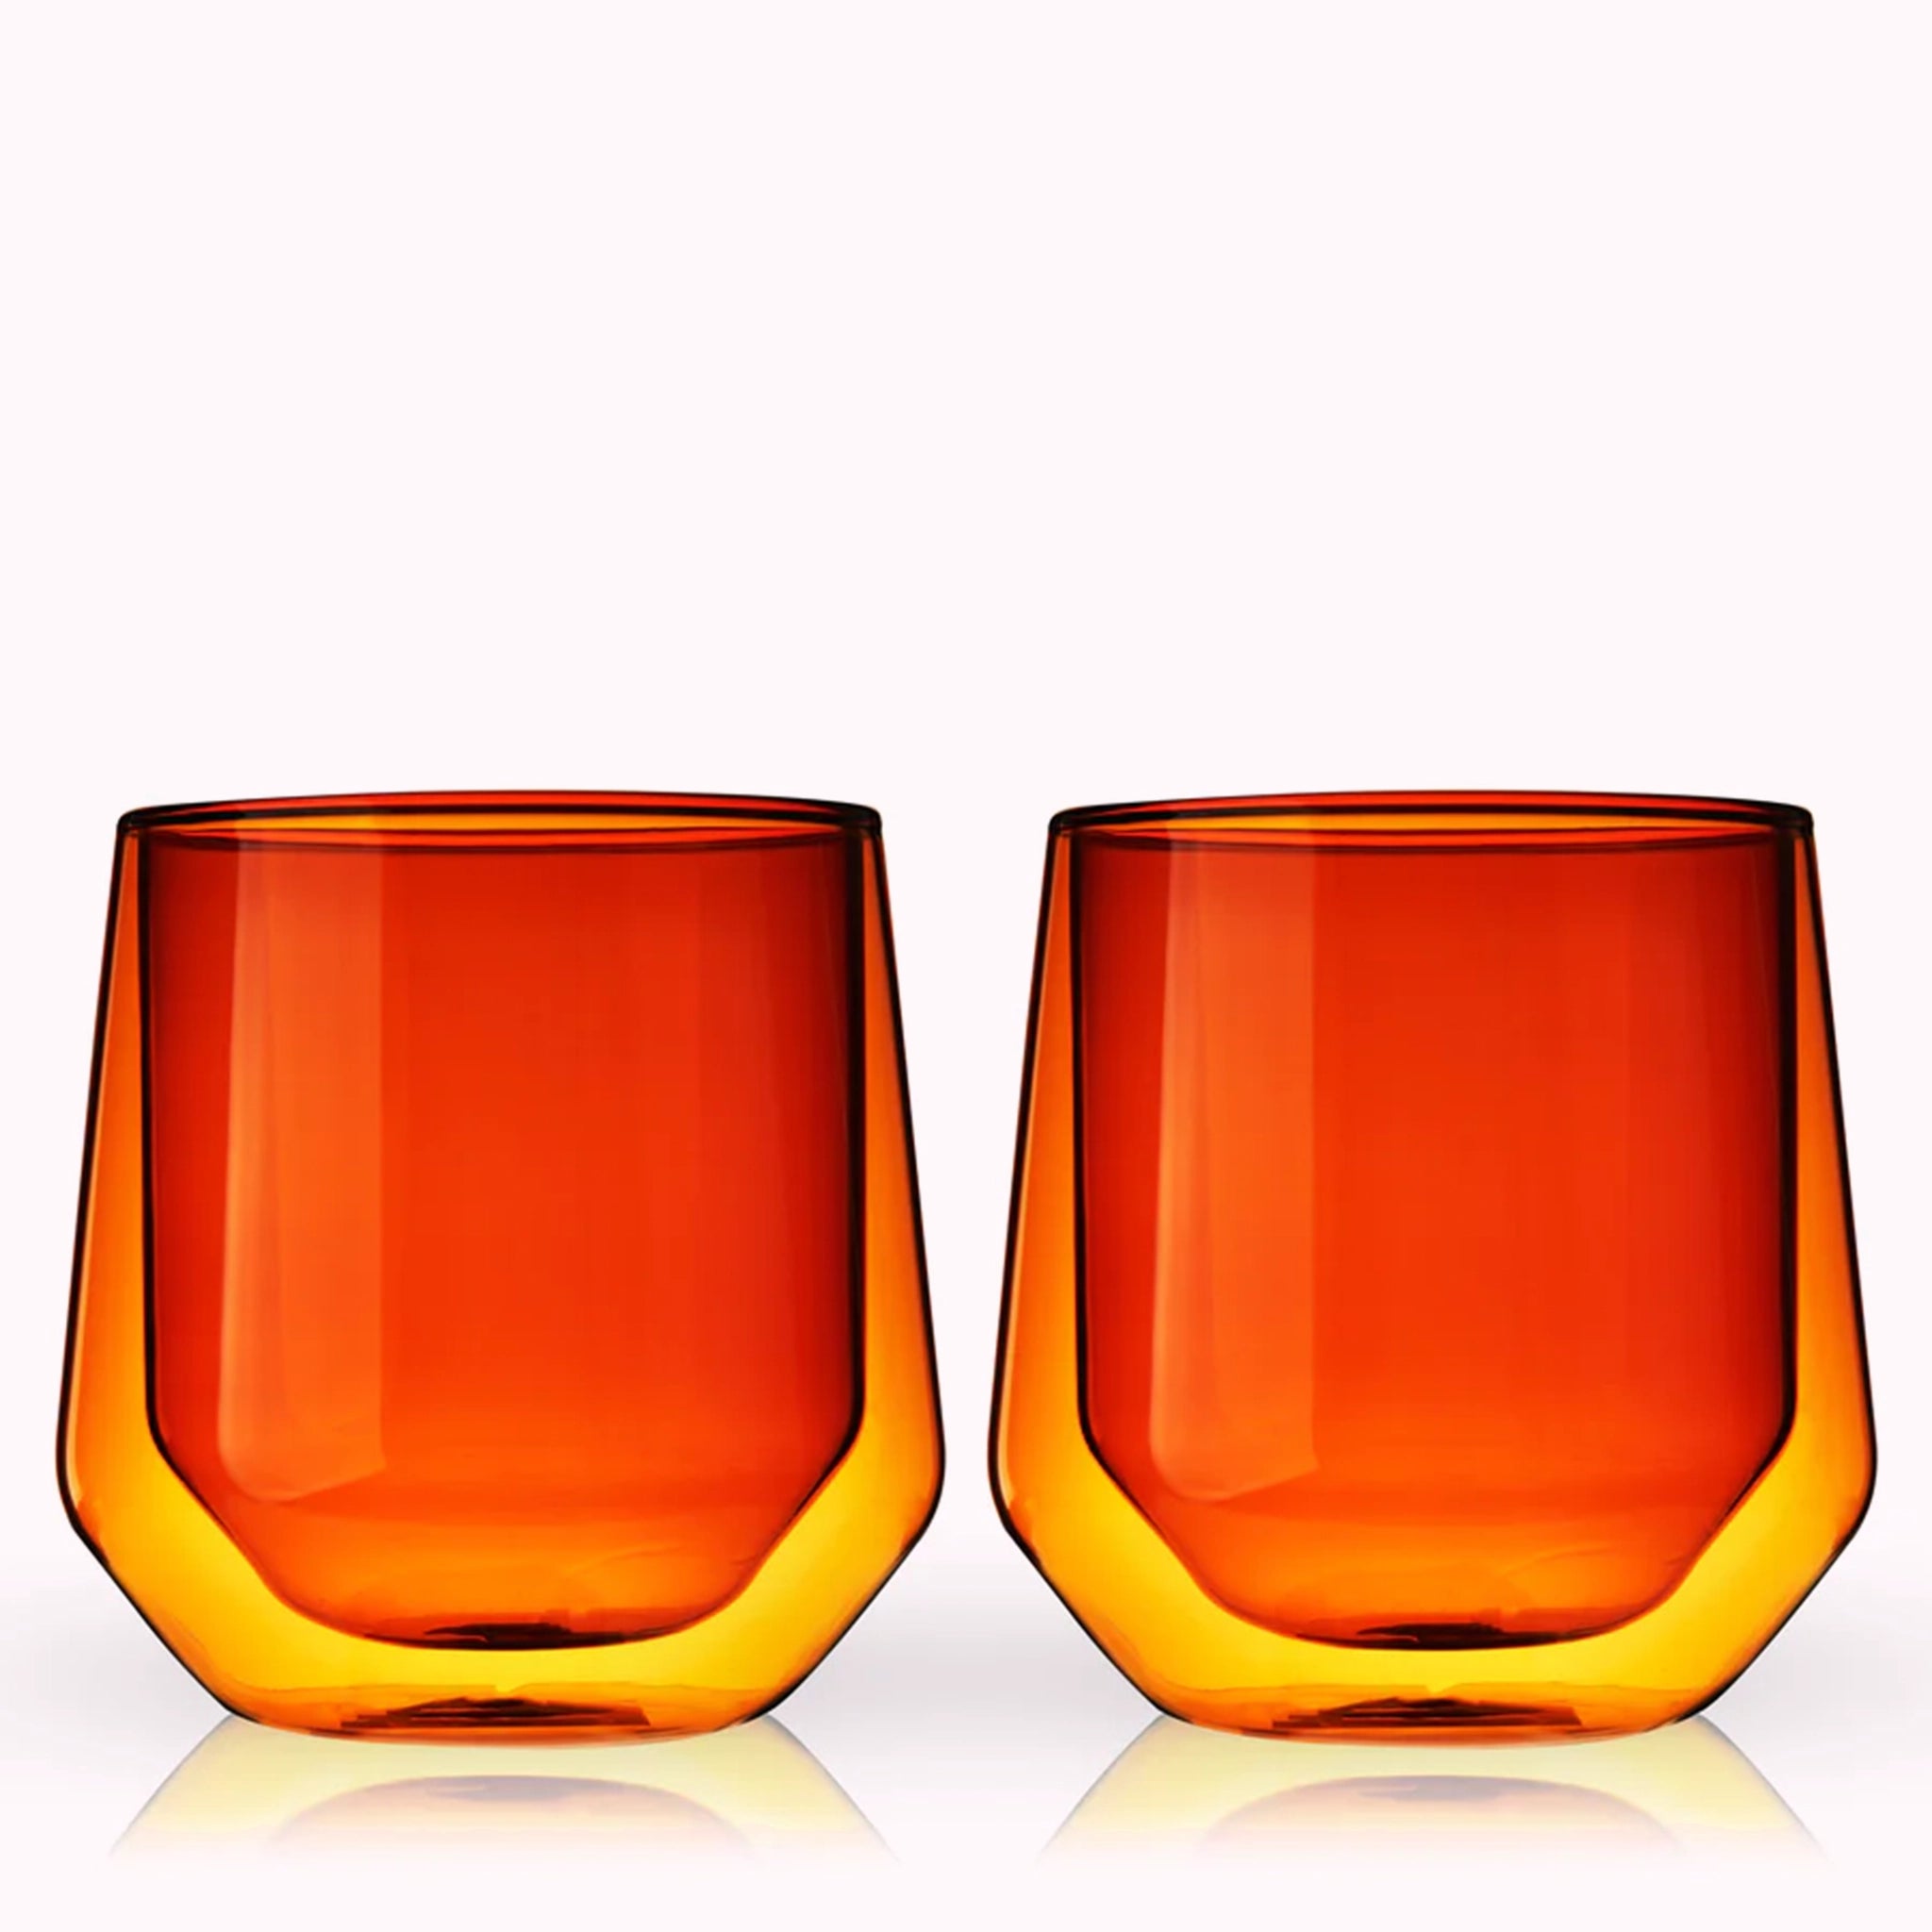 A set of glass double walled tumblers in an amber shade. 